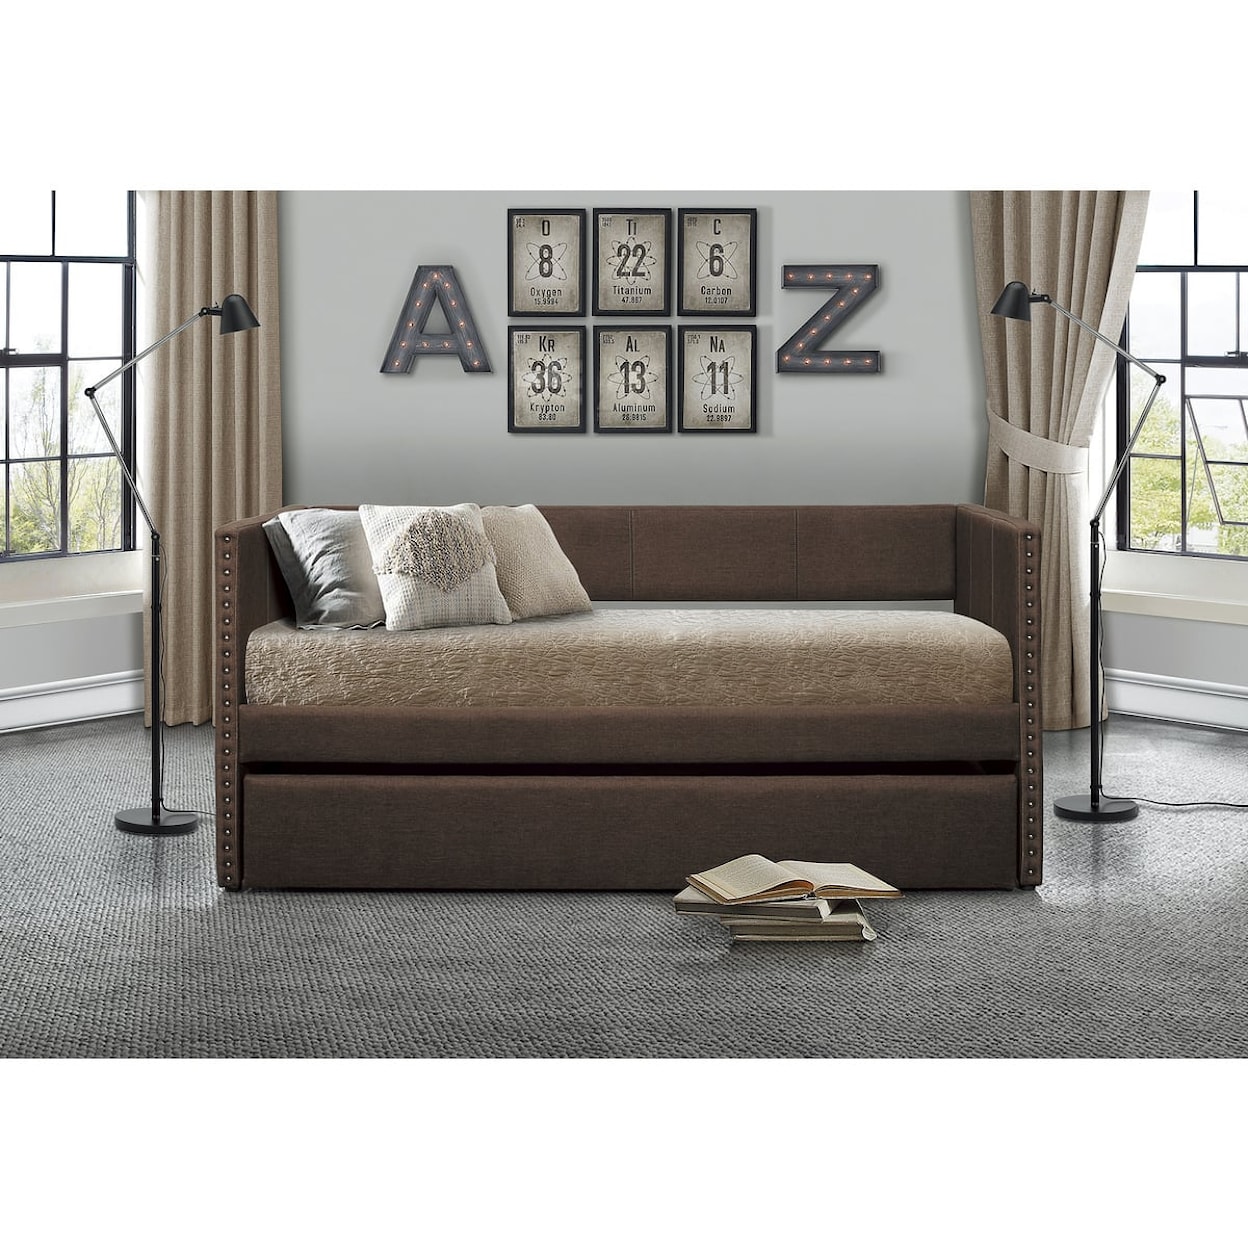 Homelegance Therese Daybed with Trundle